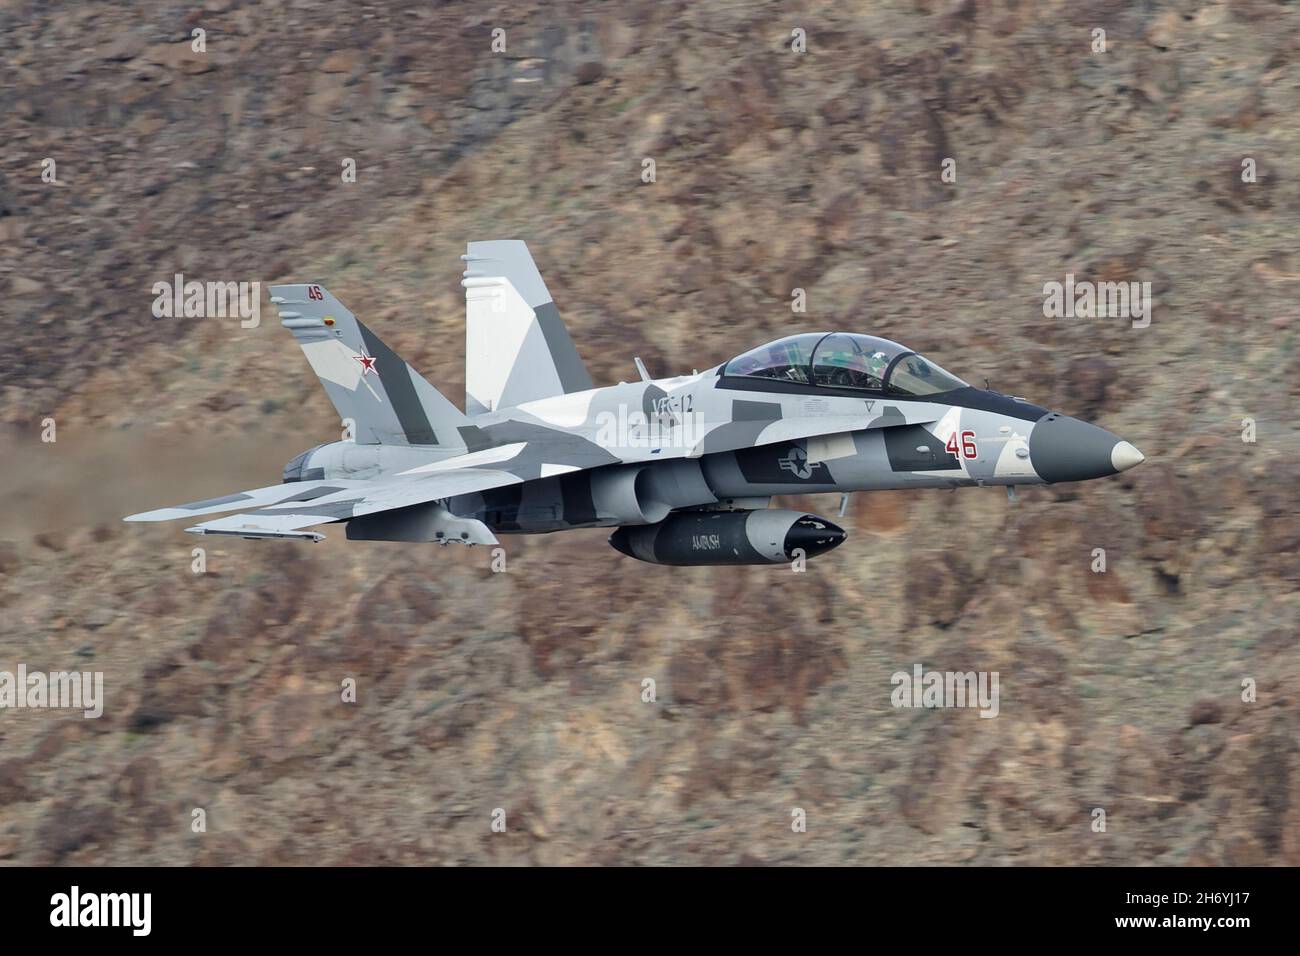 Boeing F/A-18D Hornet flown by US Navy squadron VFC-12 'Fighting Omars' from NAS Oceana Flying through Death Valley during 2019 Stock Photo